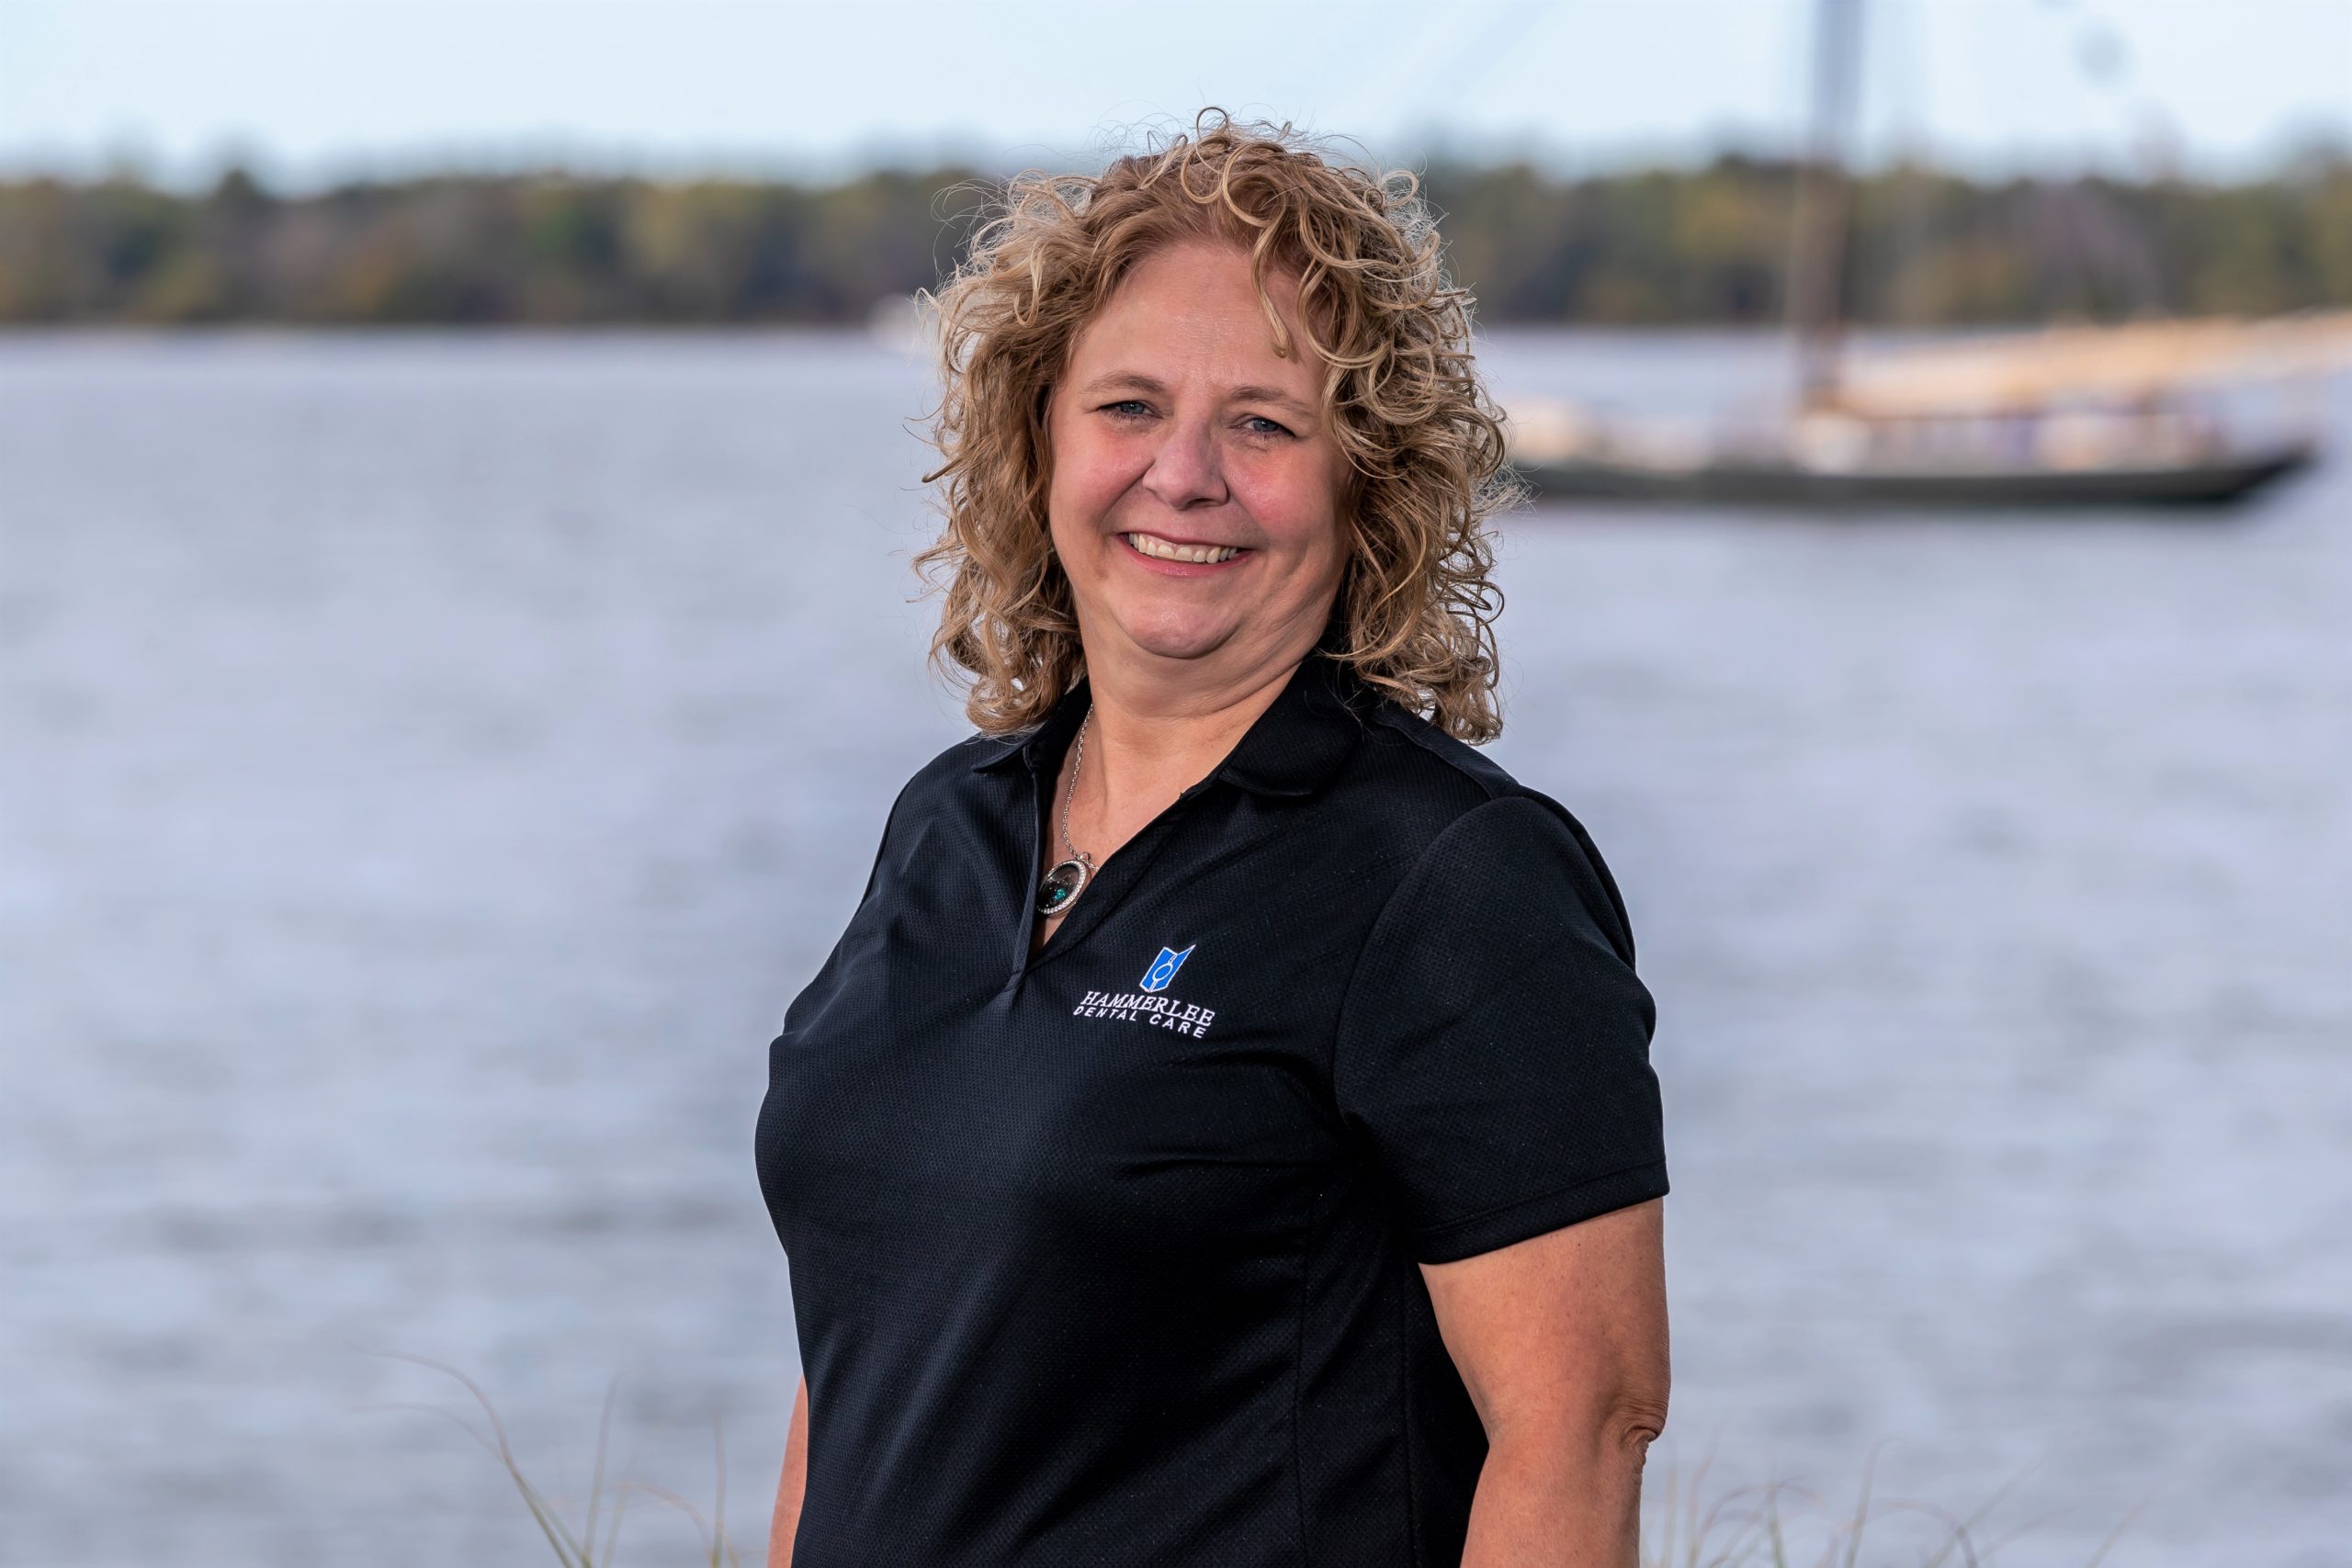 Jennifer Smith, Administrative Coordinator at Hammerlee Dental Care in Erie, PA